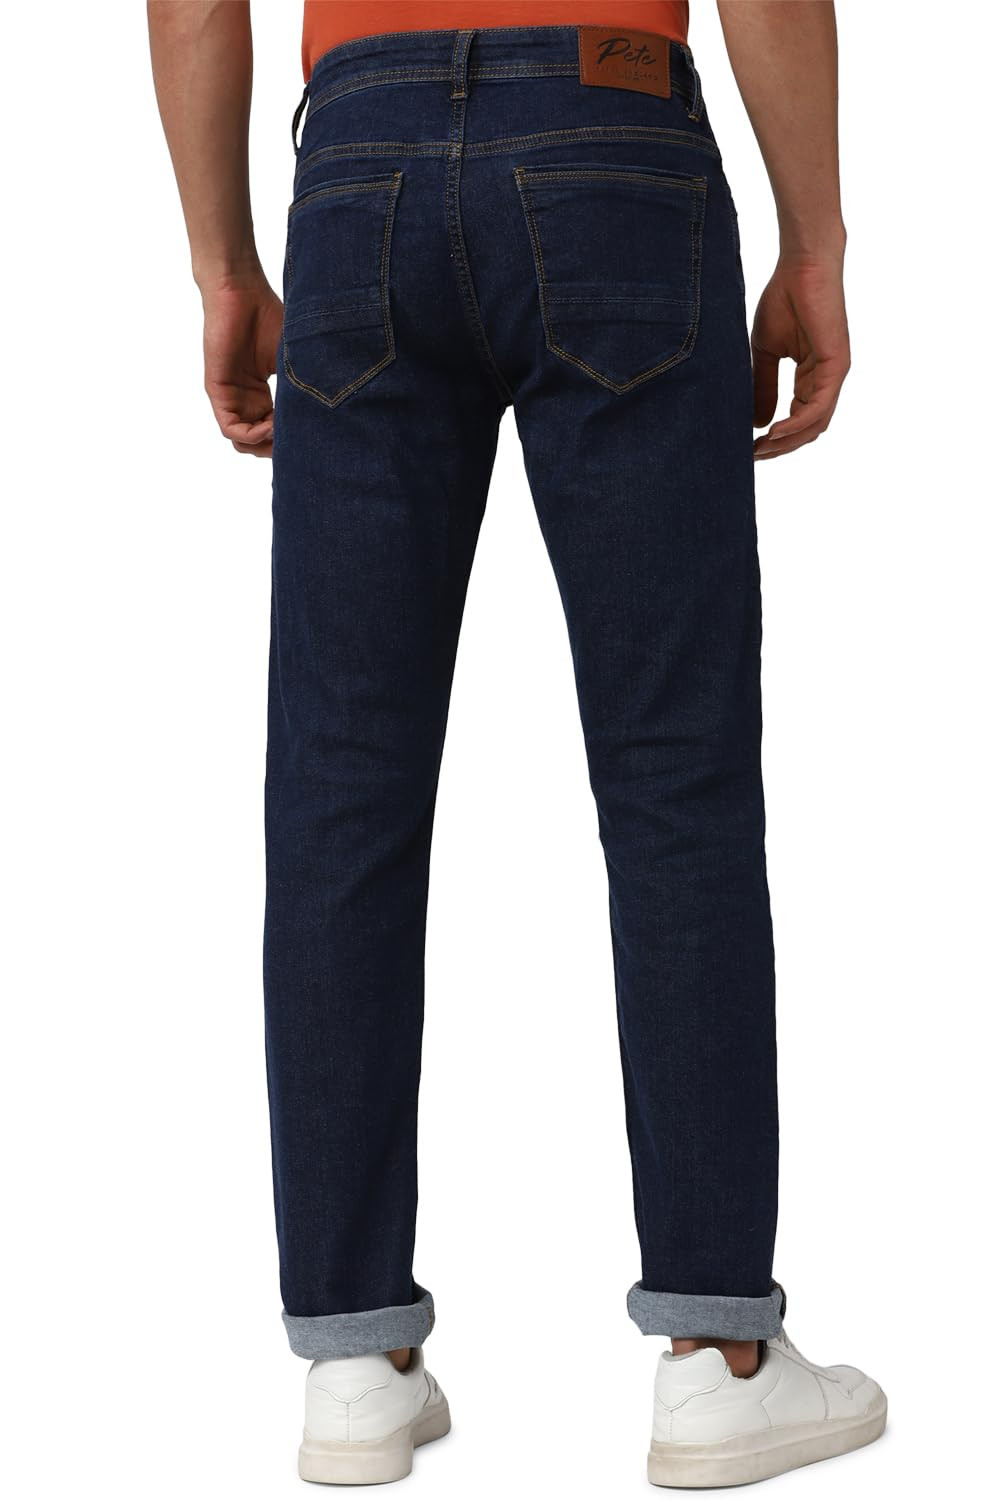 Buy PETER ENGLAND JEANS Mens 5 Pocket Heavy Wash Jeans | Shoppers Stop